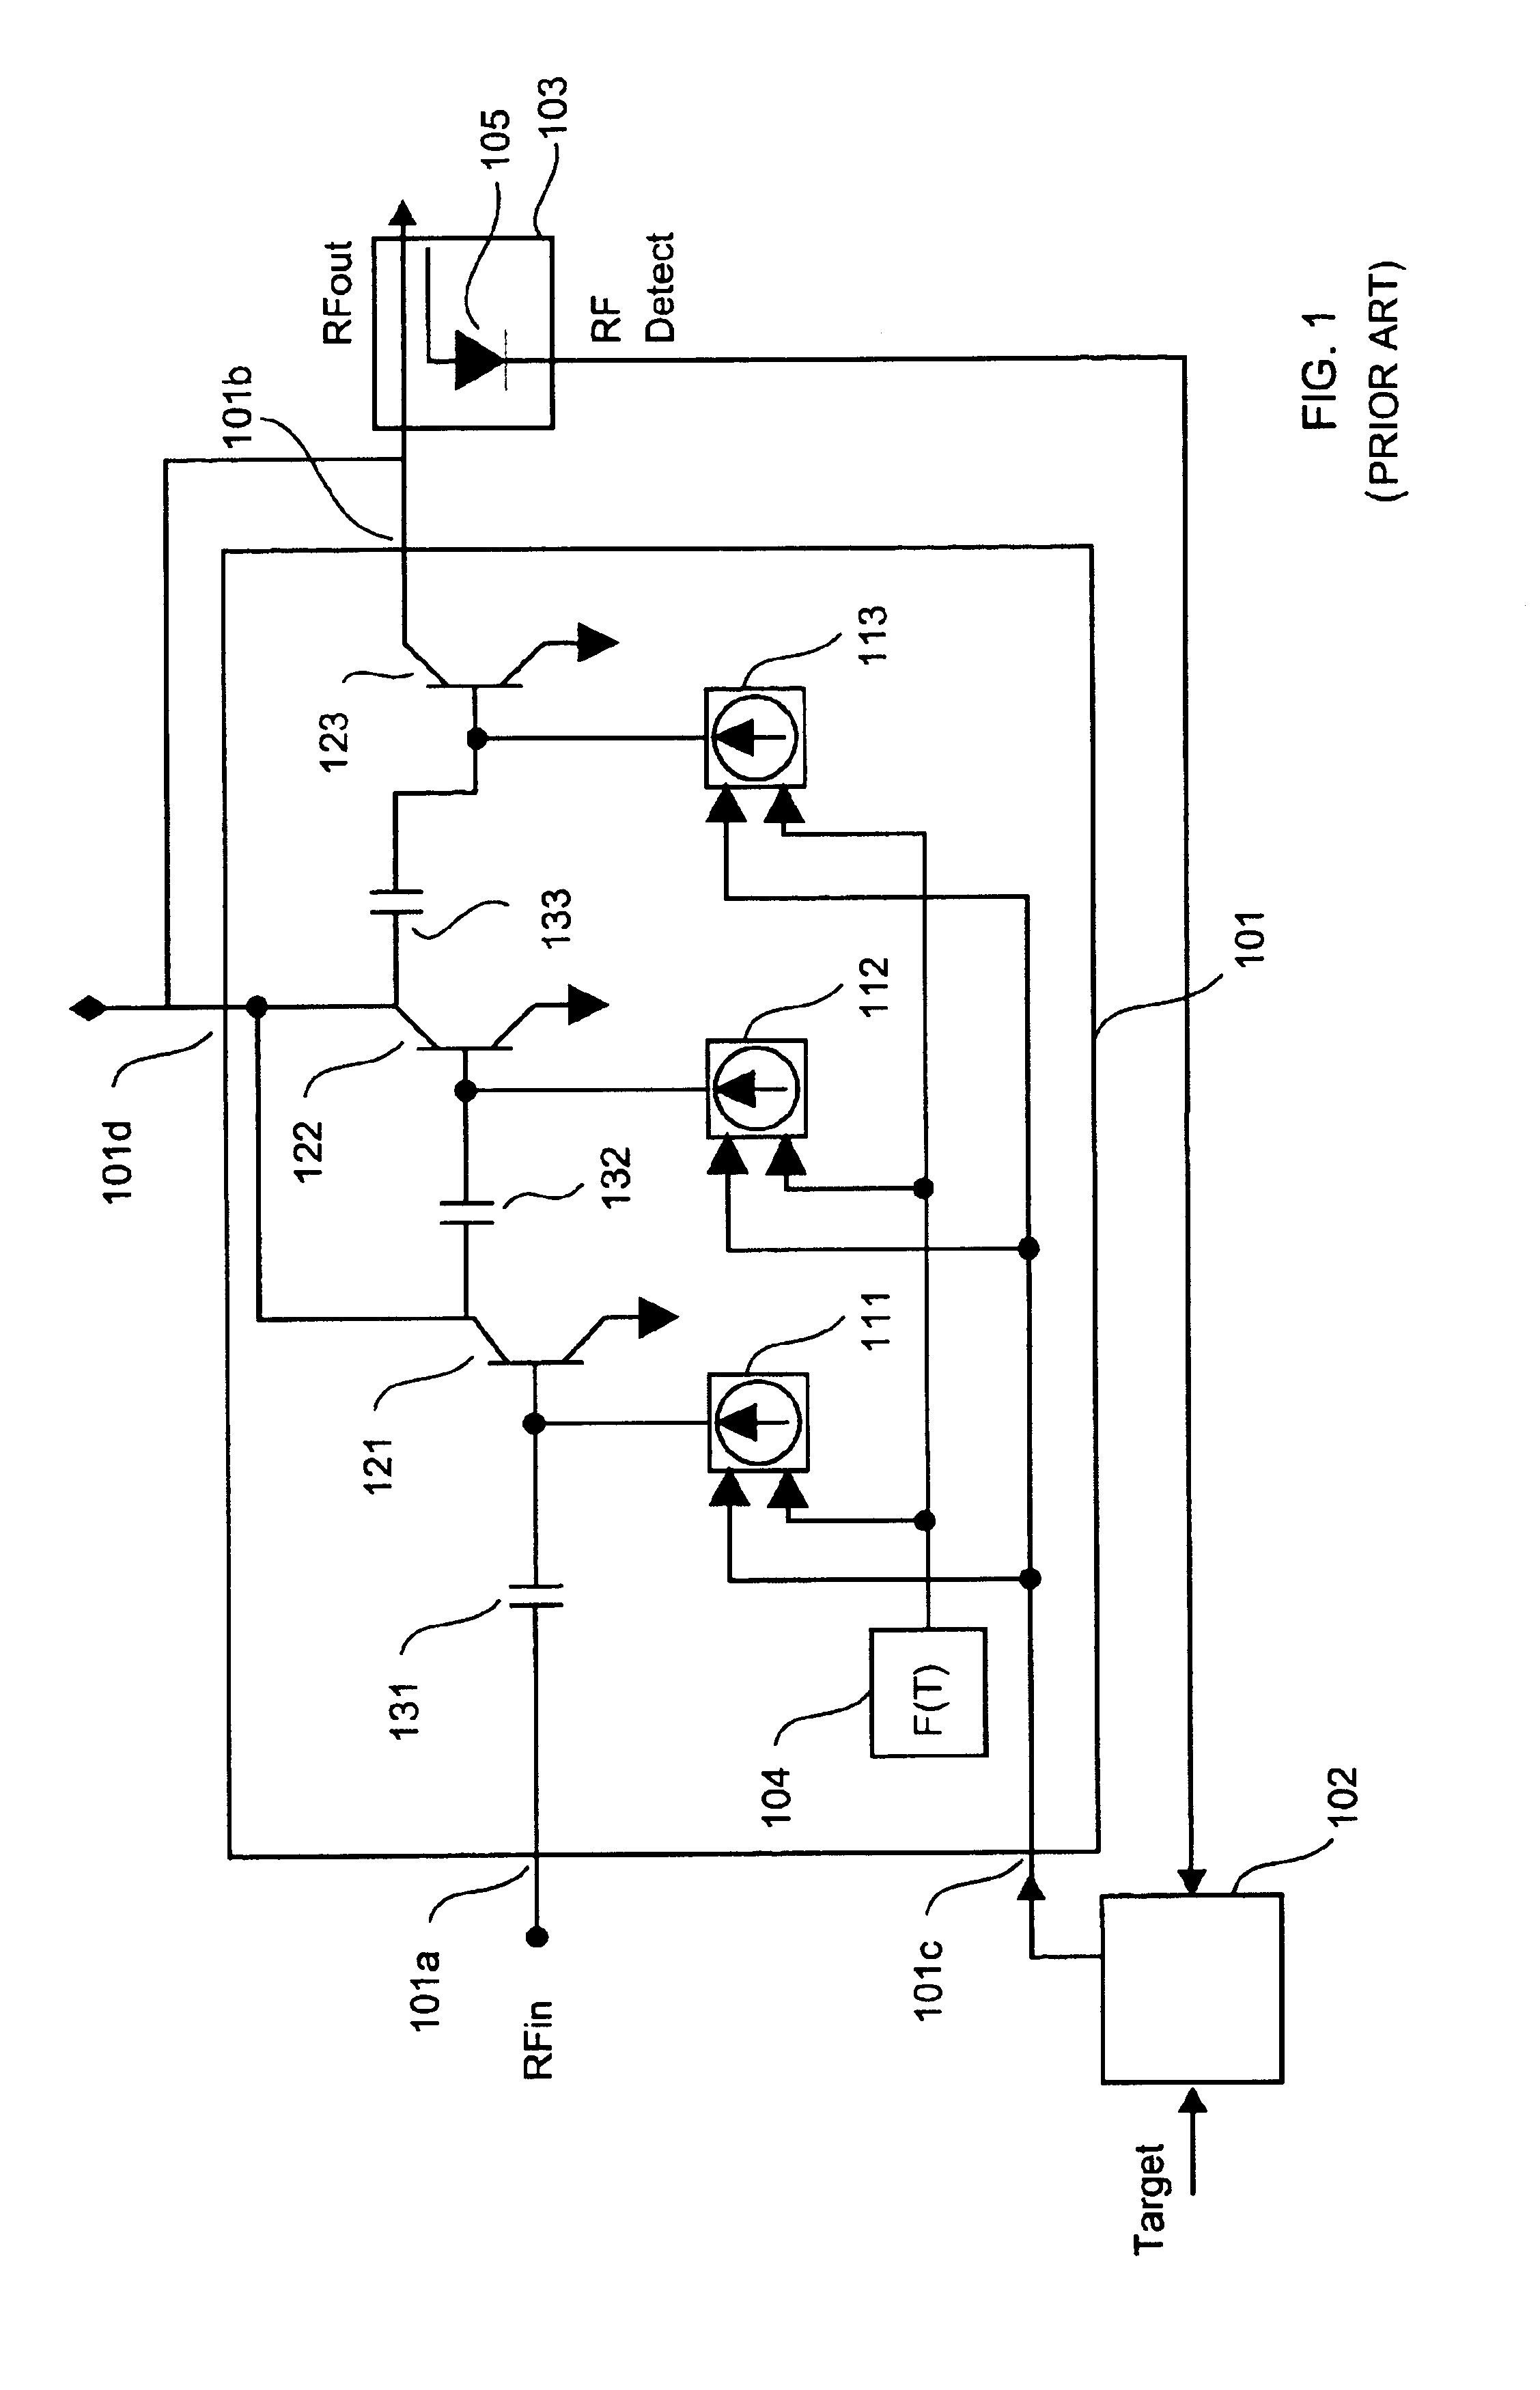 Integrated power amplifier circuit